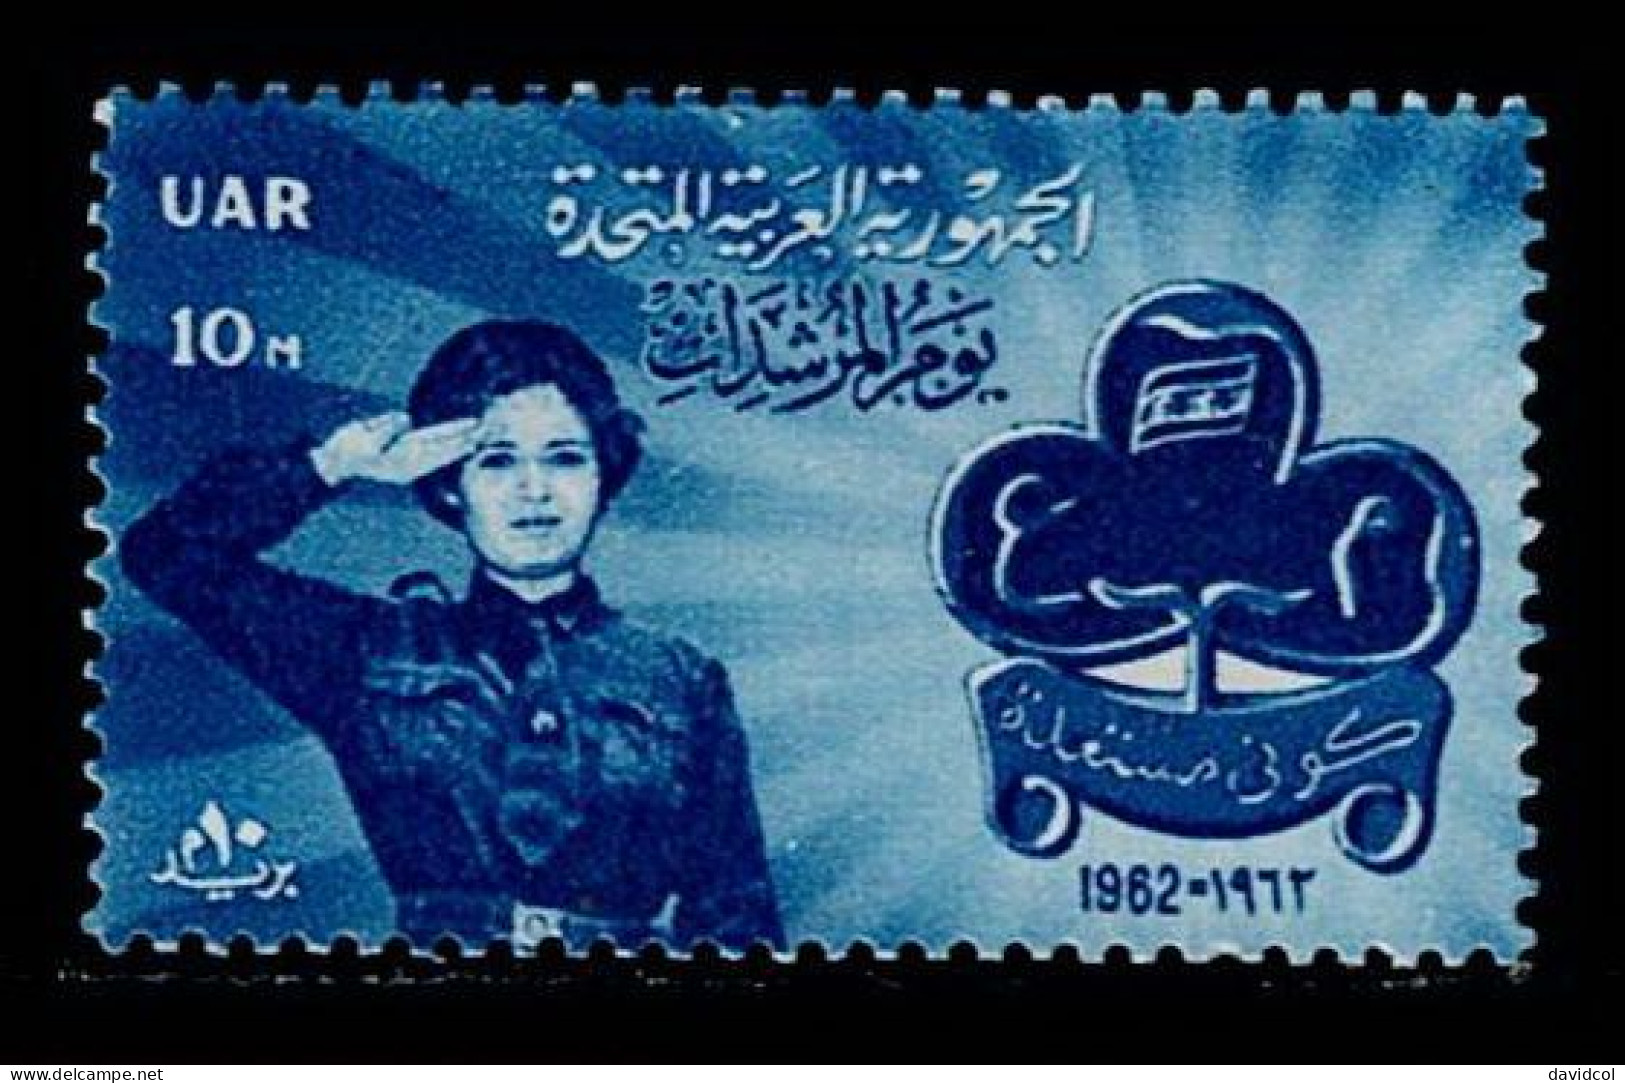 EGI-04- EGYPT - 1962 - MNH -SCOUTS- 25TH ANNIVERSARY OF THE EGYPTIAN GIRL SCOUTS - Unused Stamps